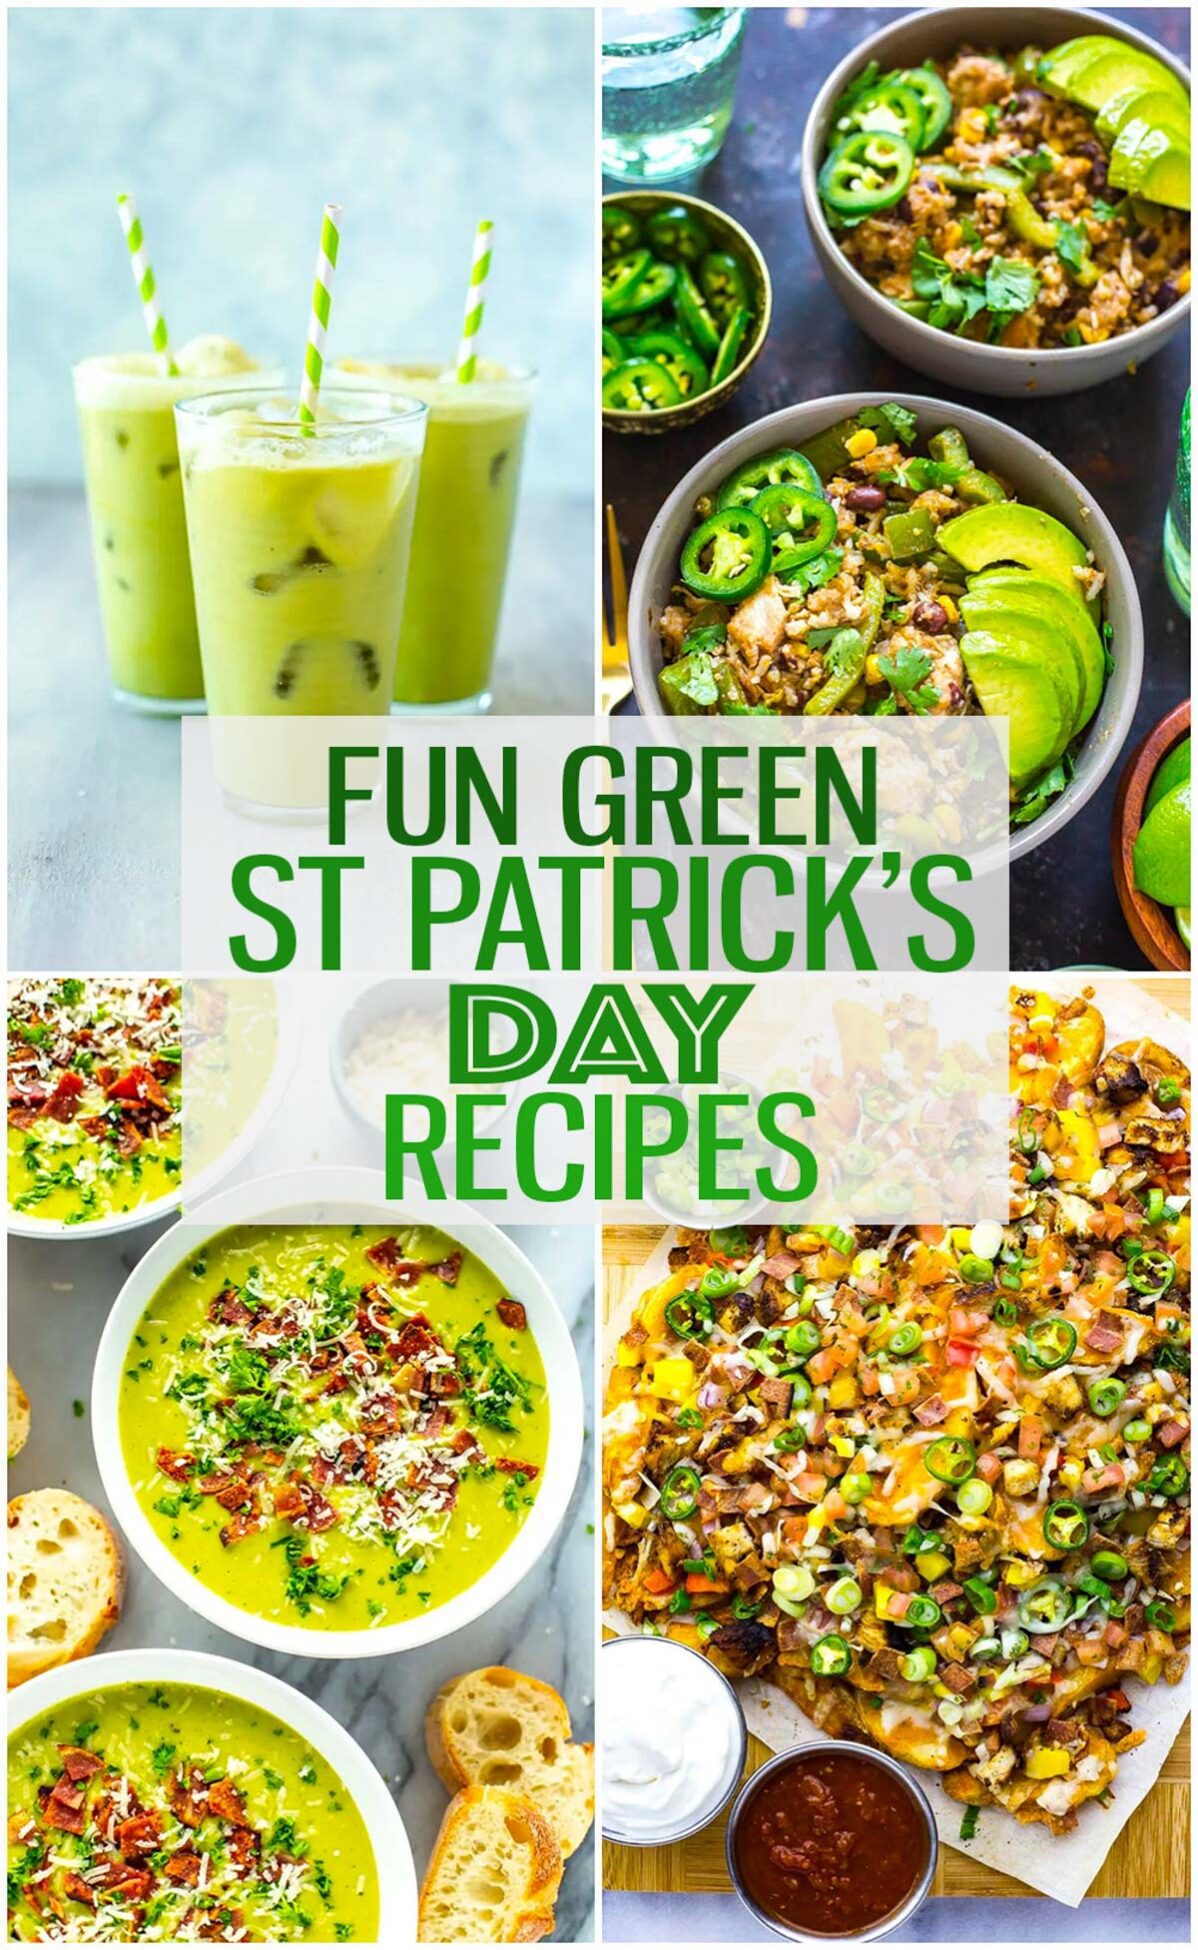 A collage of four different St. Patrick's Day food ideas with the text "Fun Green St. Patrick's Day Recipes".